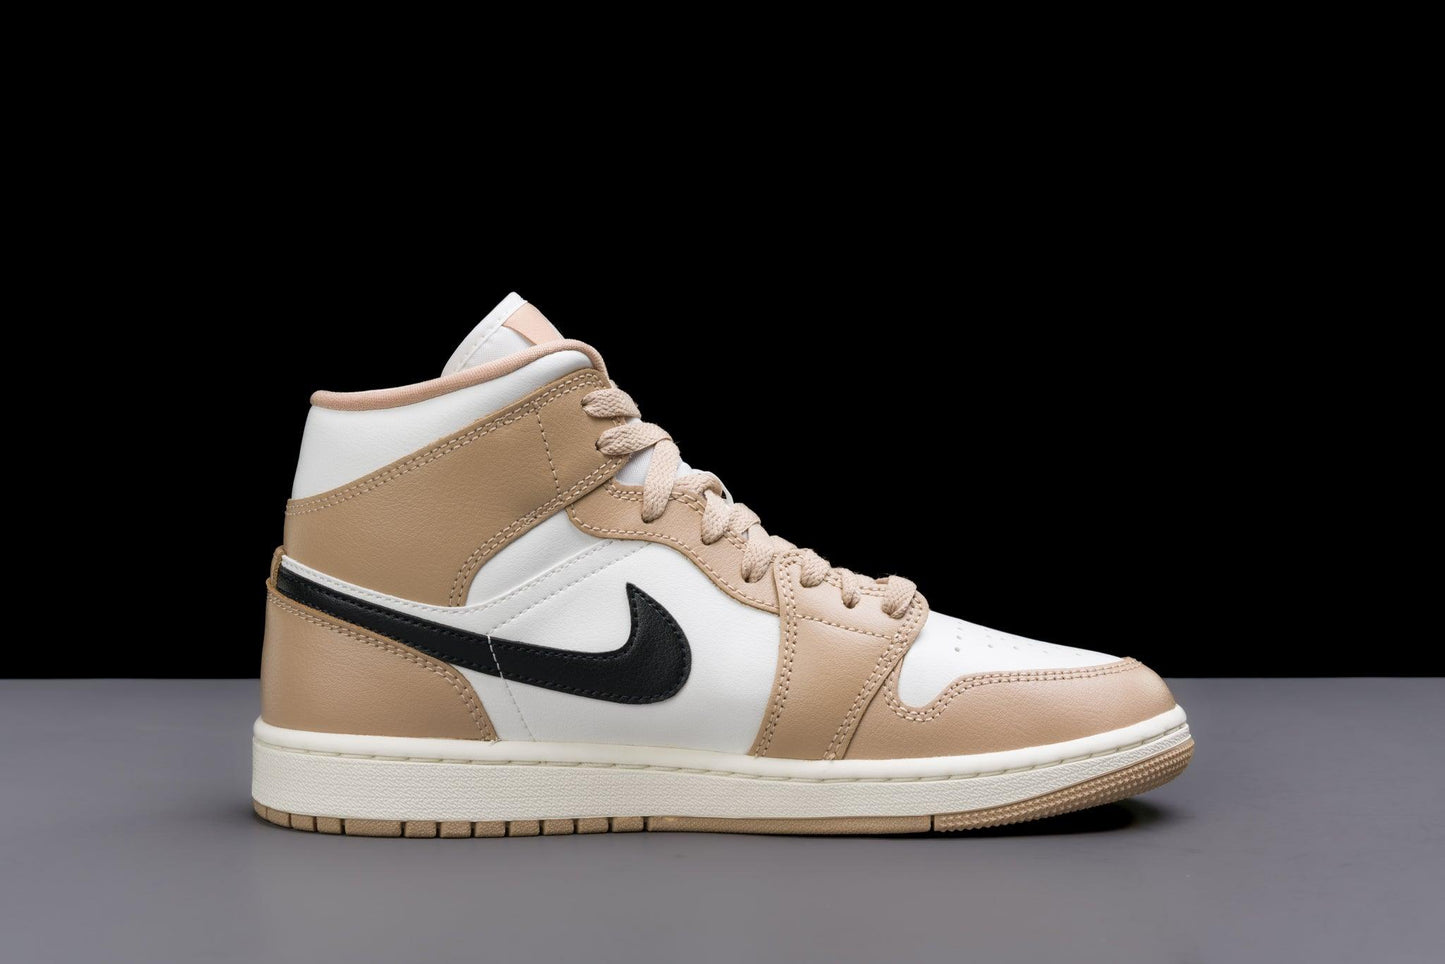 The experimental Jordan 1 High is currently only listed at Mid WMNS 'Desert' - Urlfreeze Shop